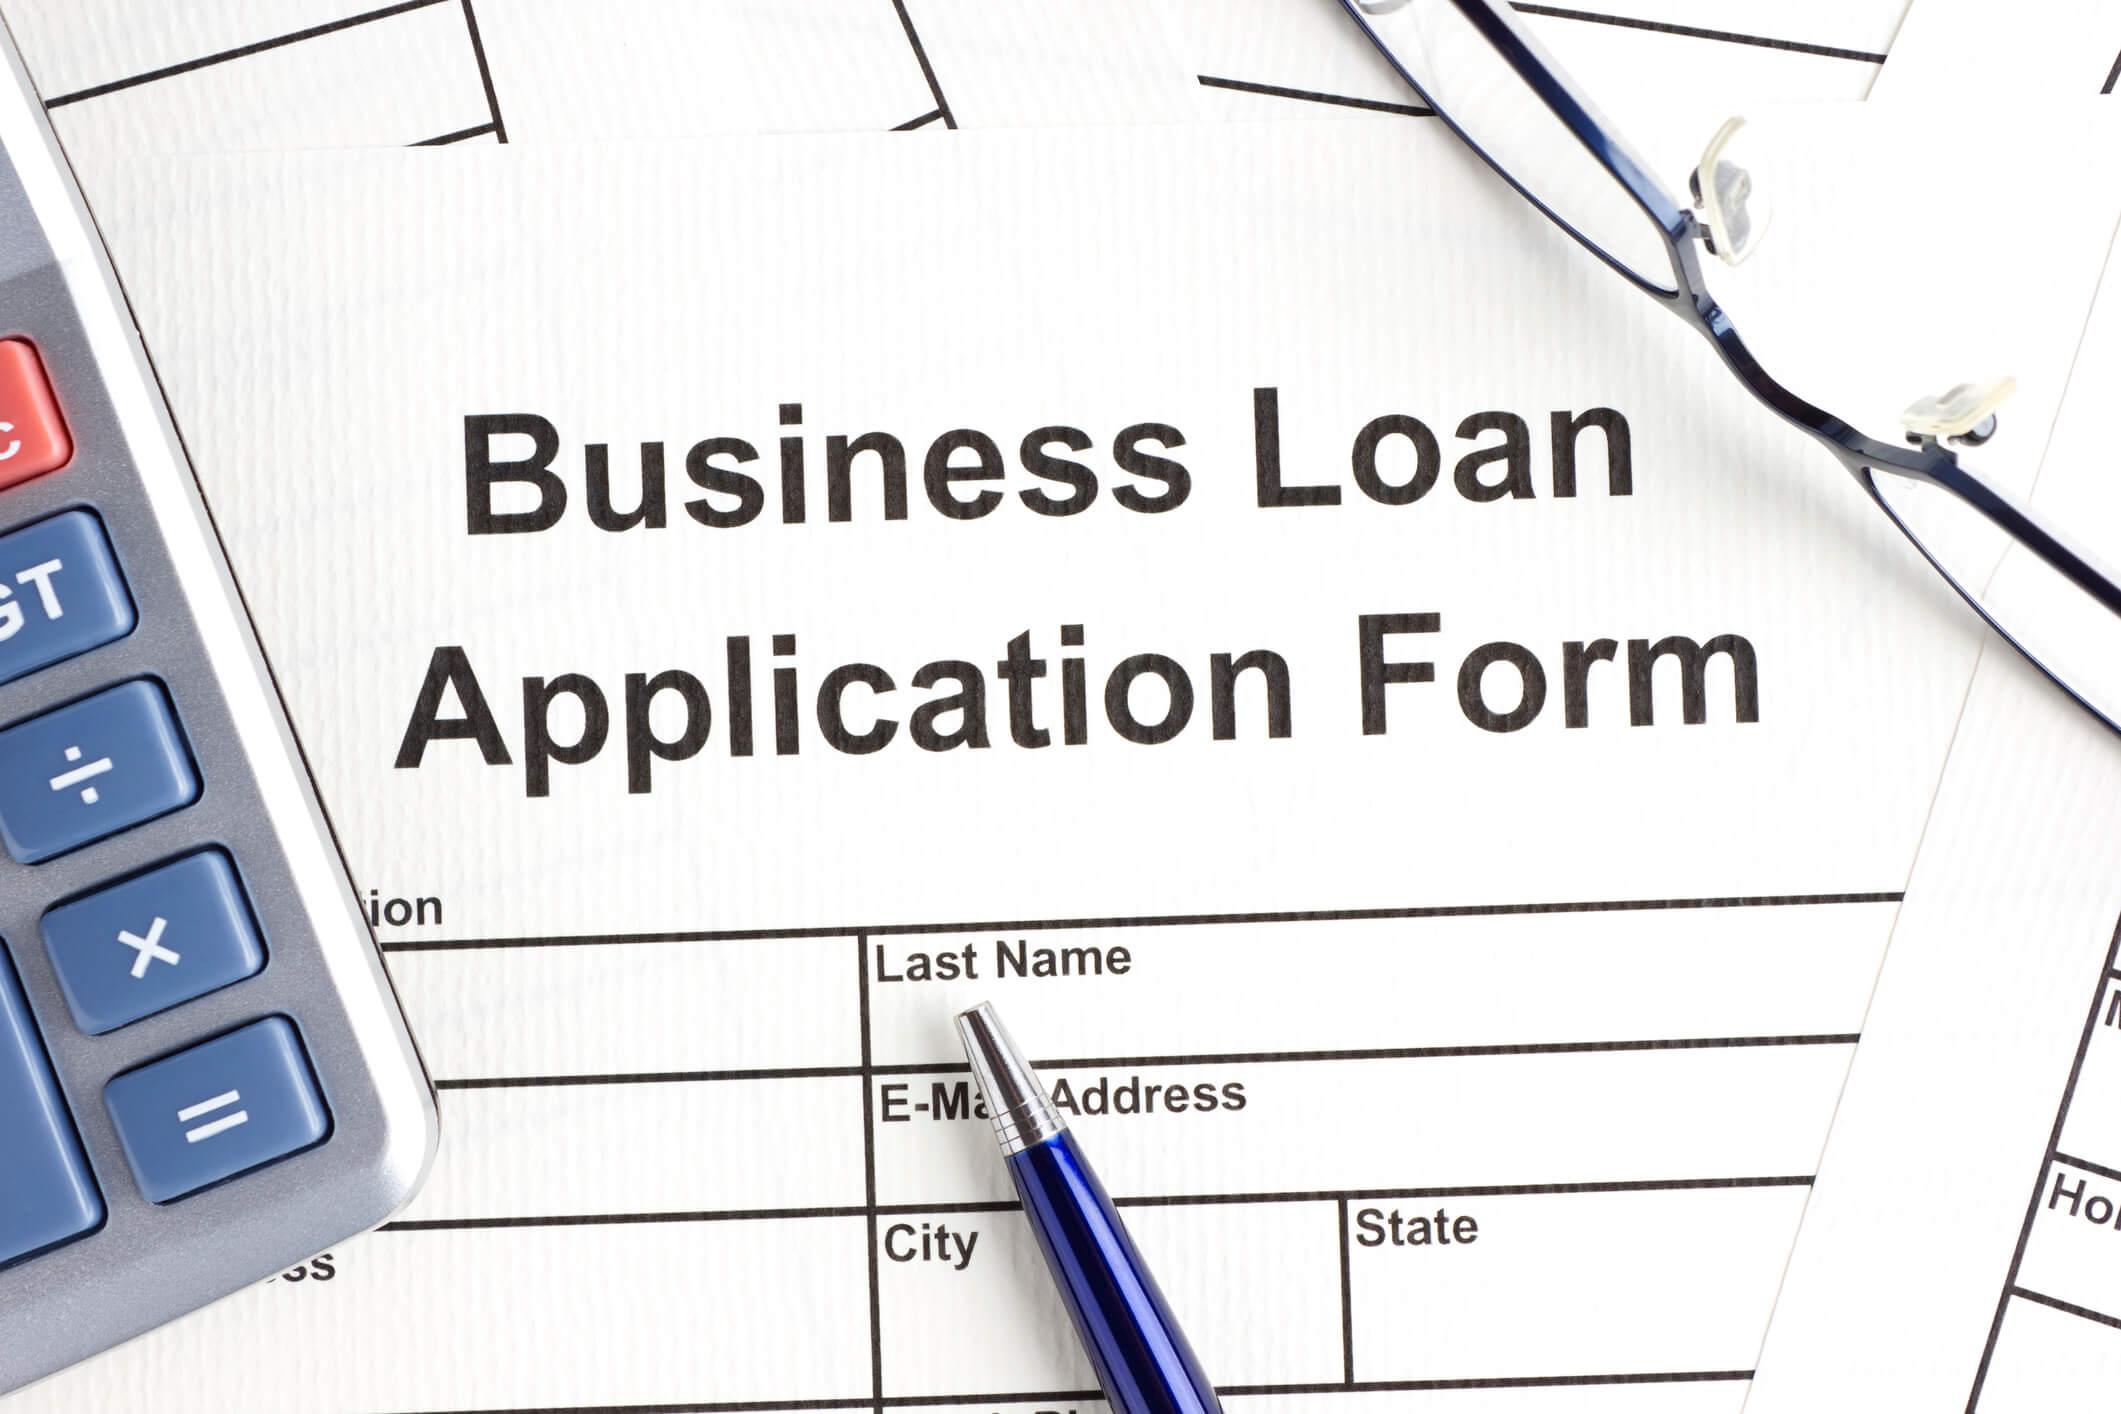 Small Business Loan Application - Complete Controller